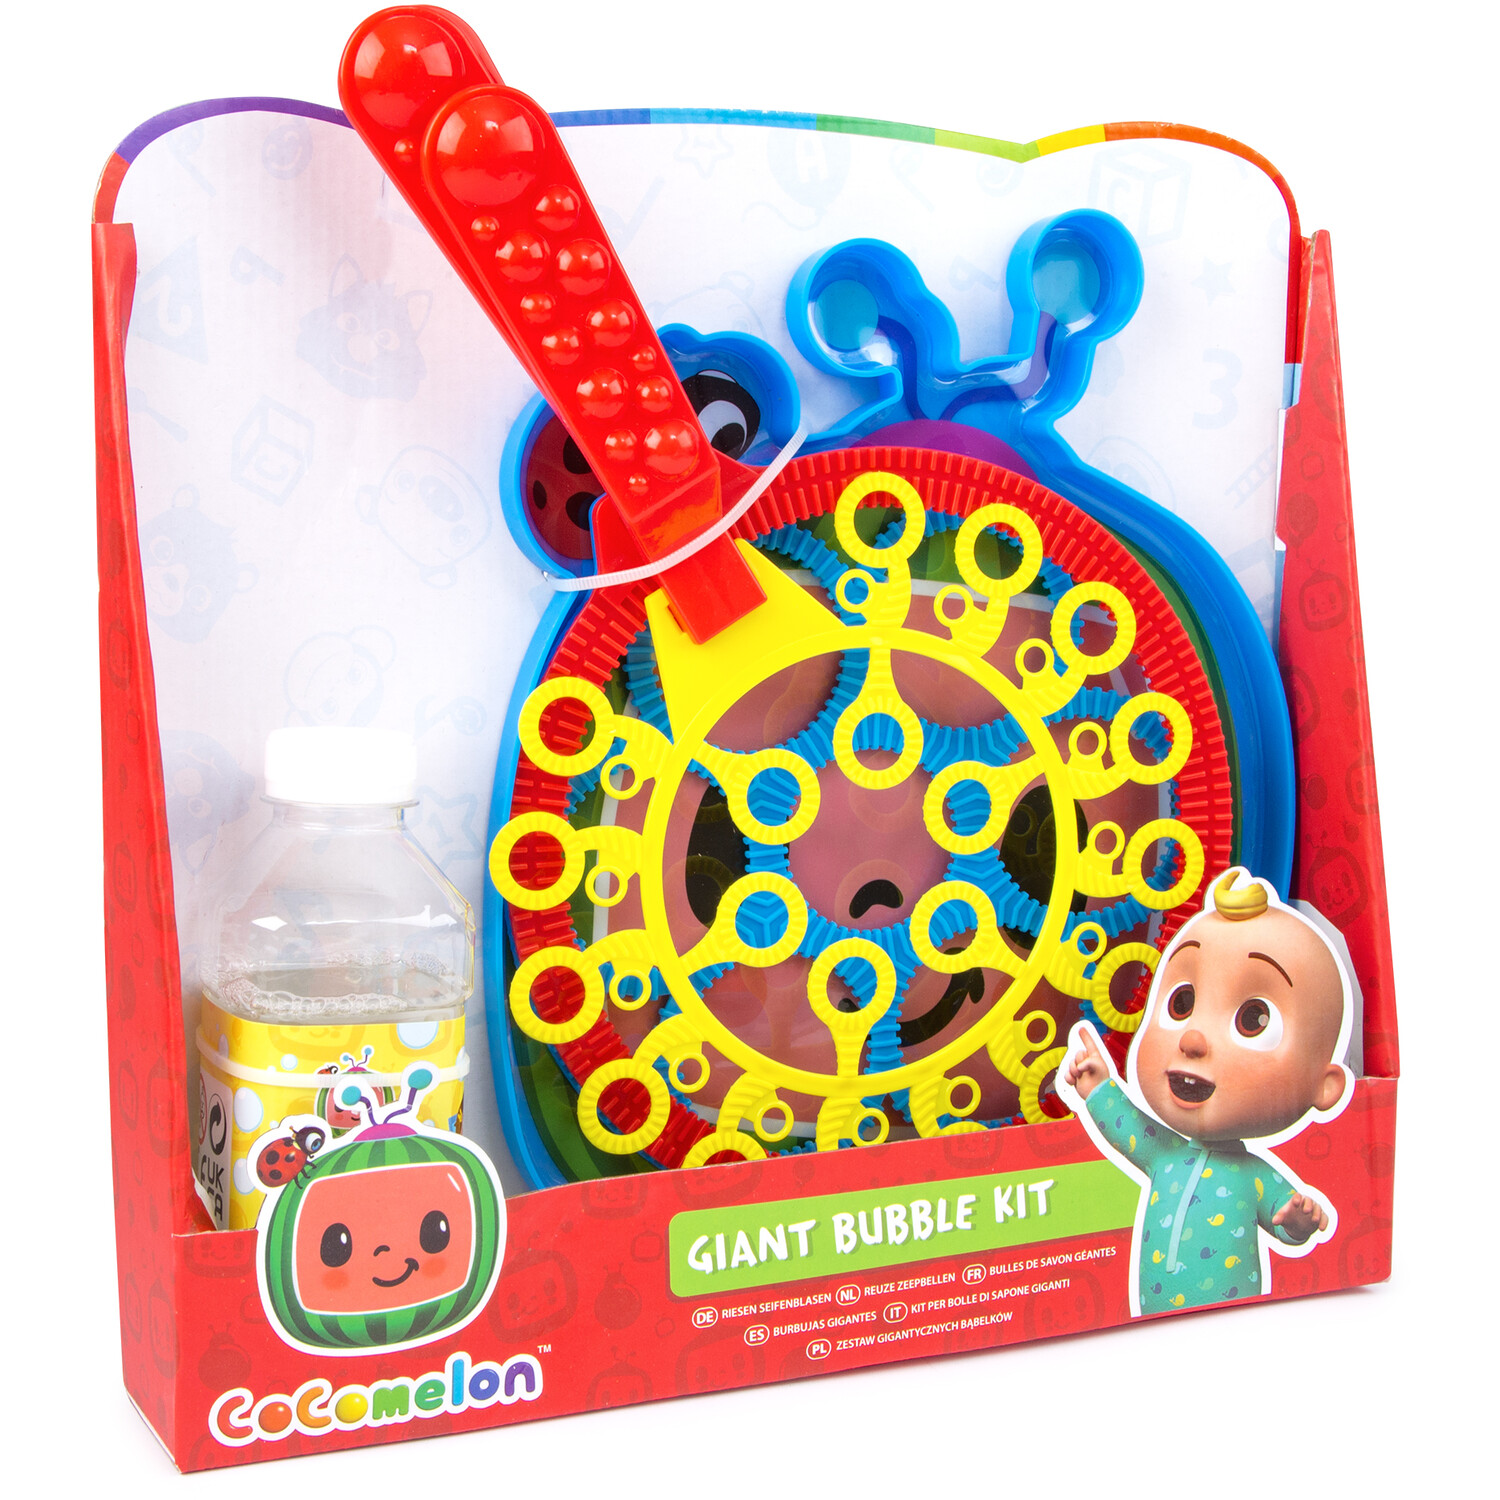 CoComelon Giant Bubble Set - Red Image 1